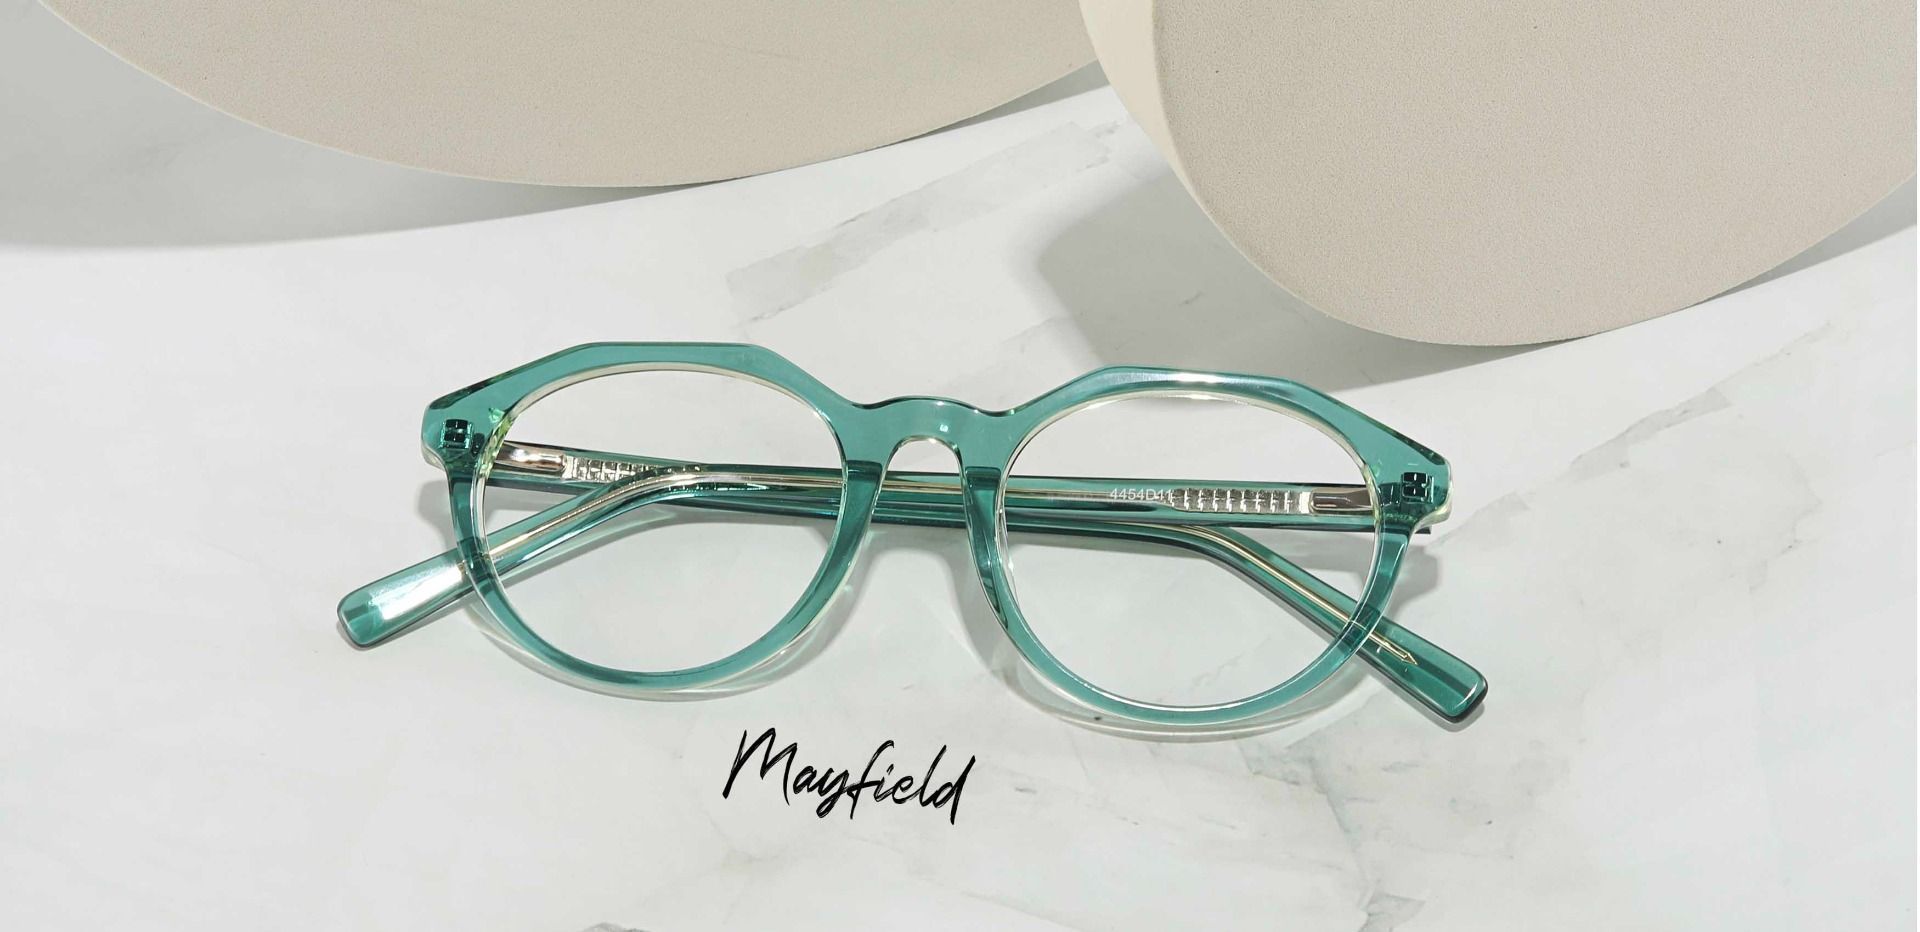 Mayfield Oval Reading Glasses - Green